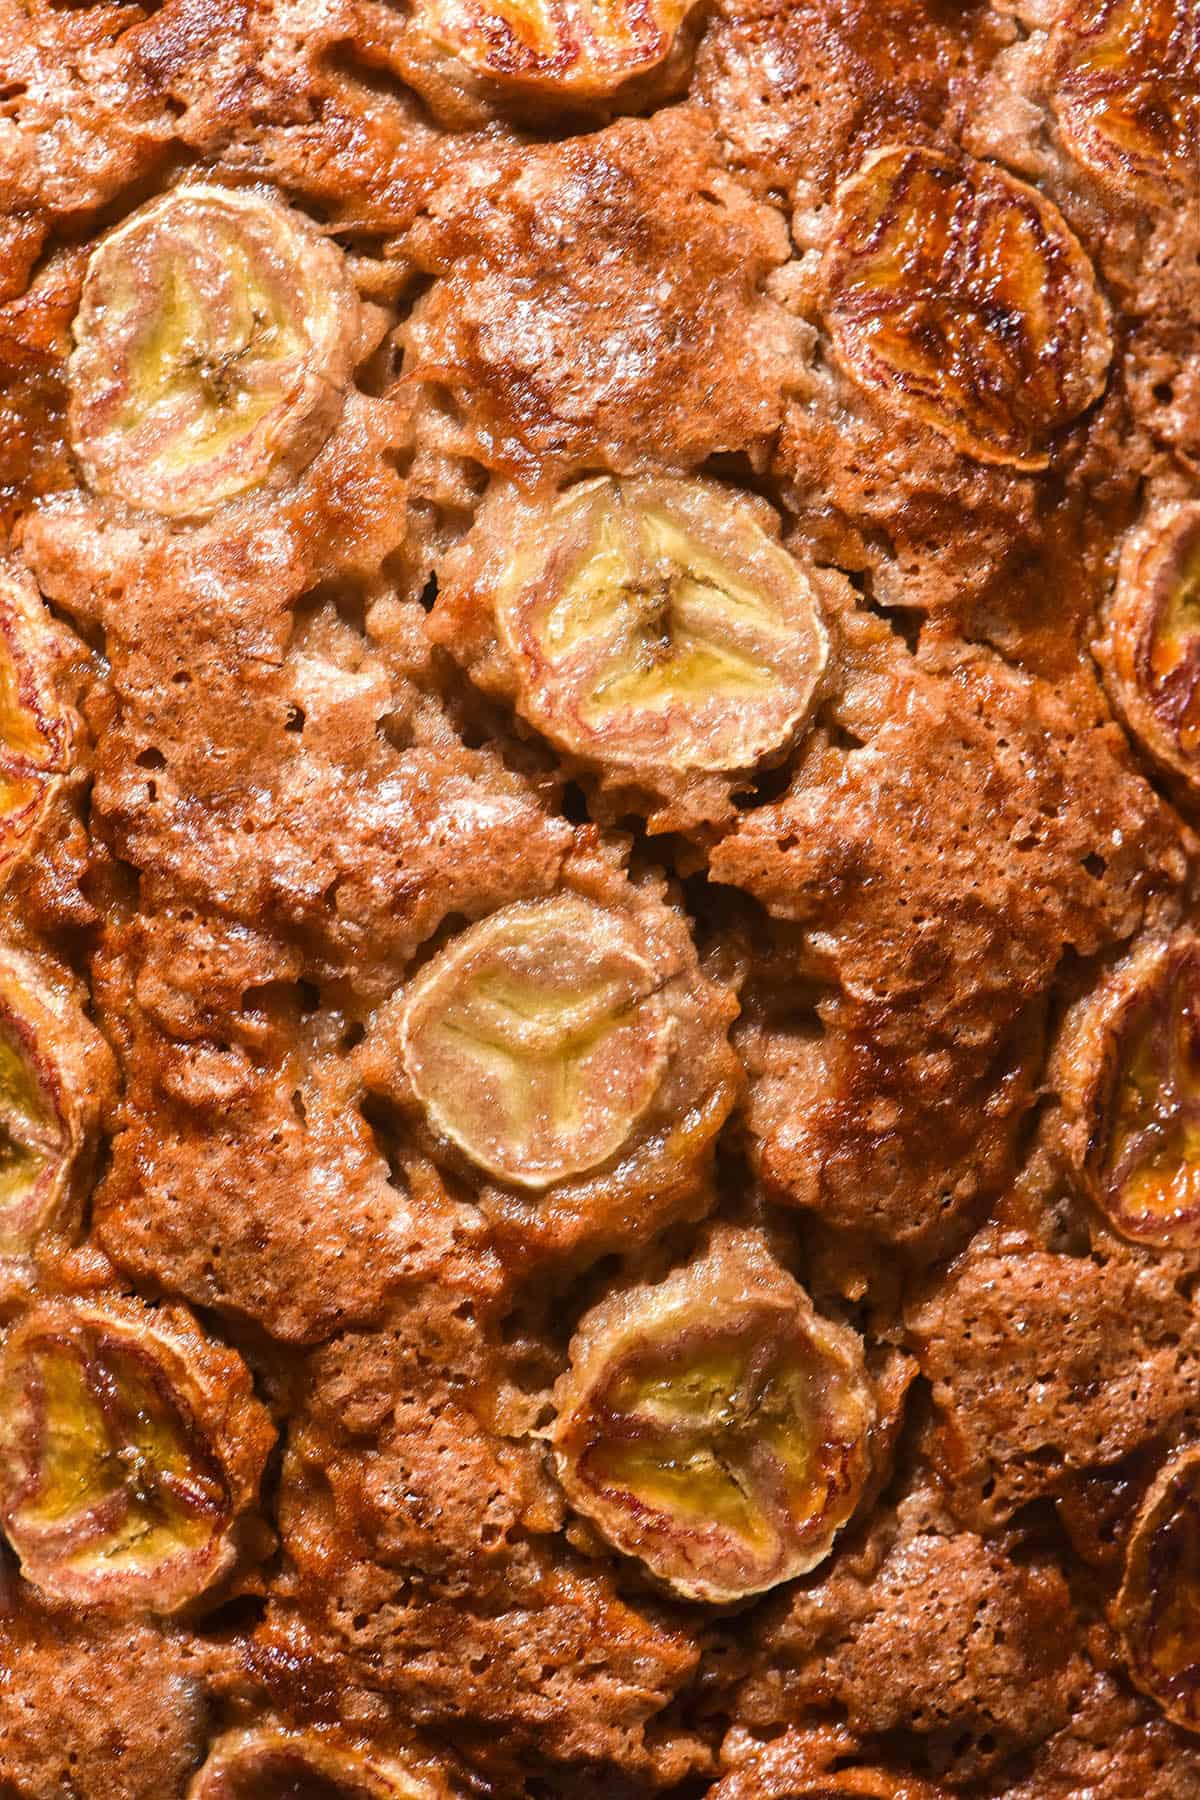 A macro close up image of the top of a gluten free banana bread